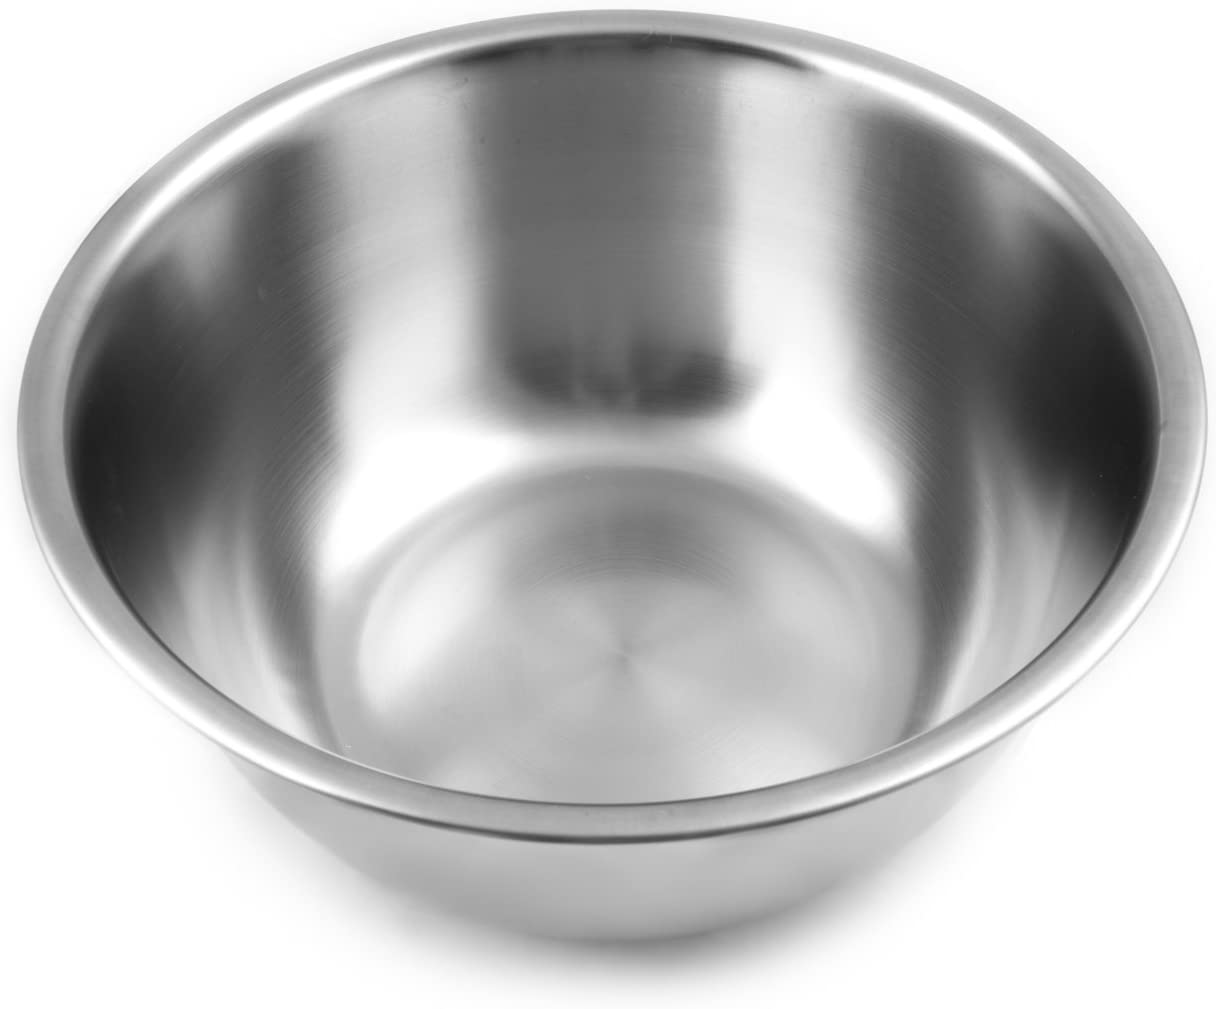 flydende lærred Alfabet Stainless Steel Mixing Bowls - Dutchman's Store